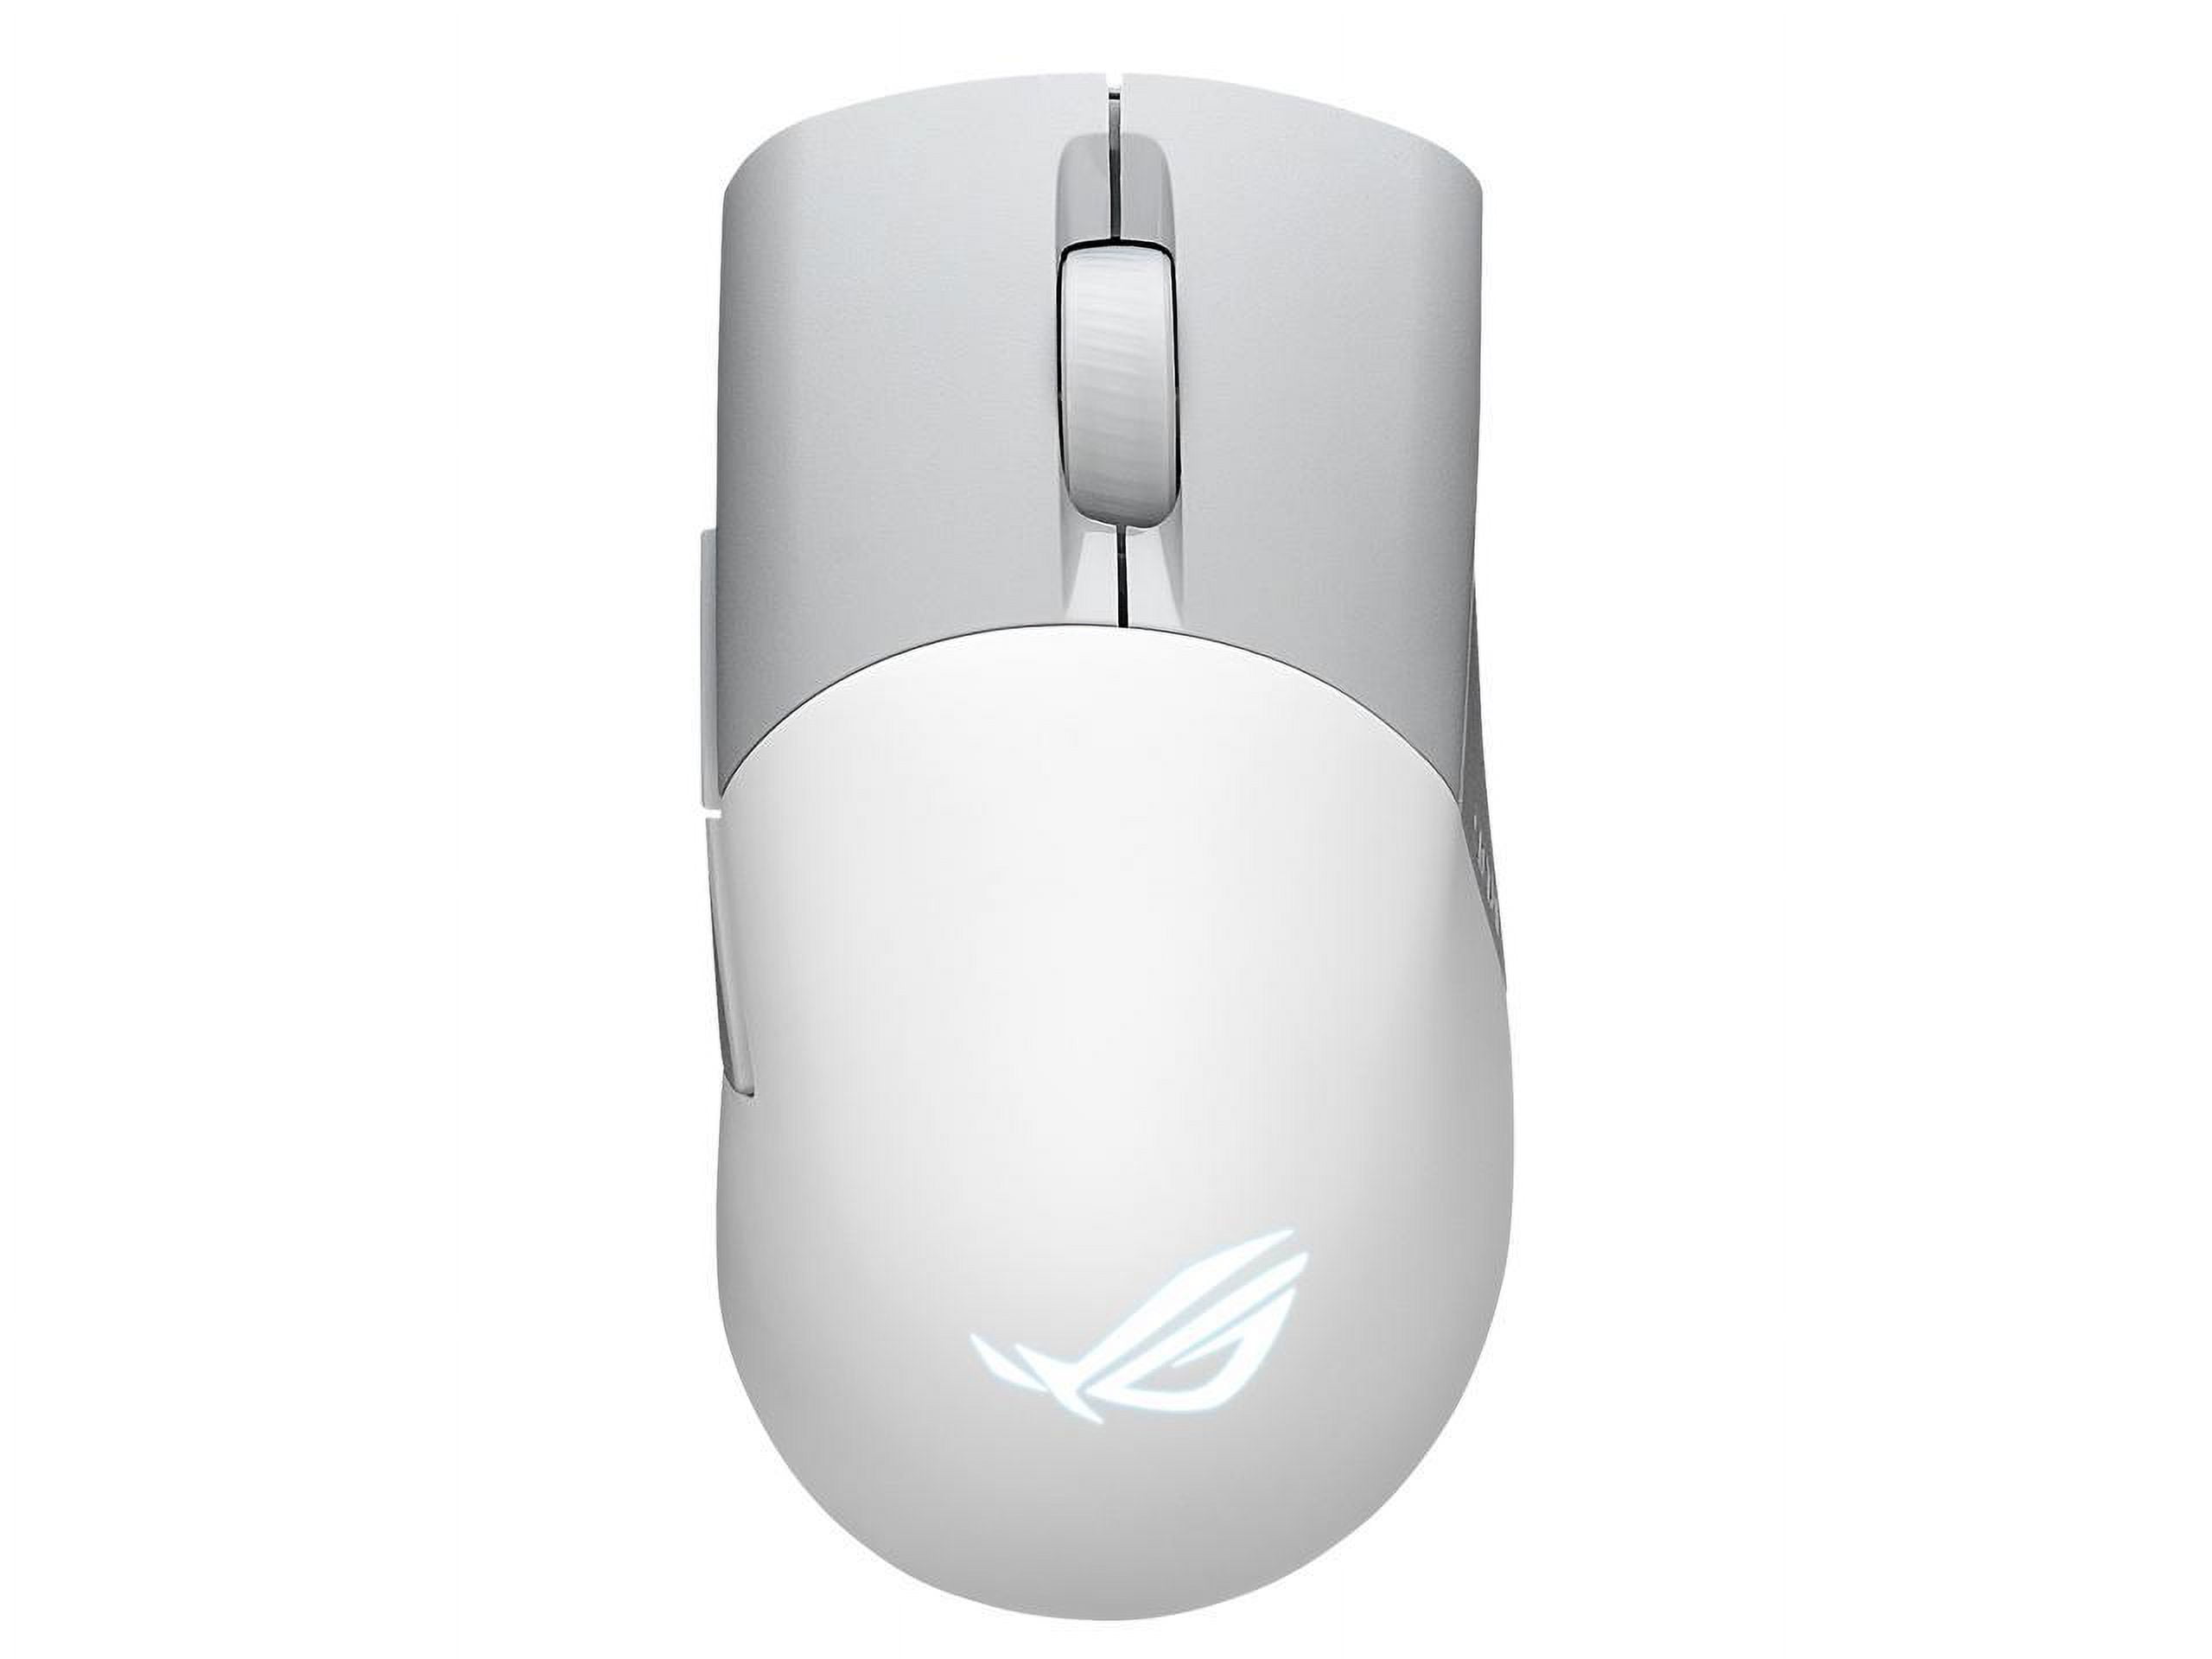 Picture of ASUS P709ROGKerisWLAimPointWHT ROG Keris AimPoint Wireless Gaming Mouse, White